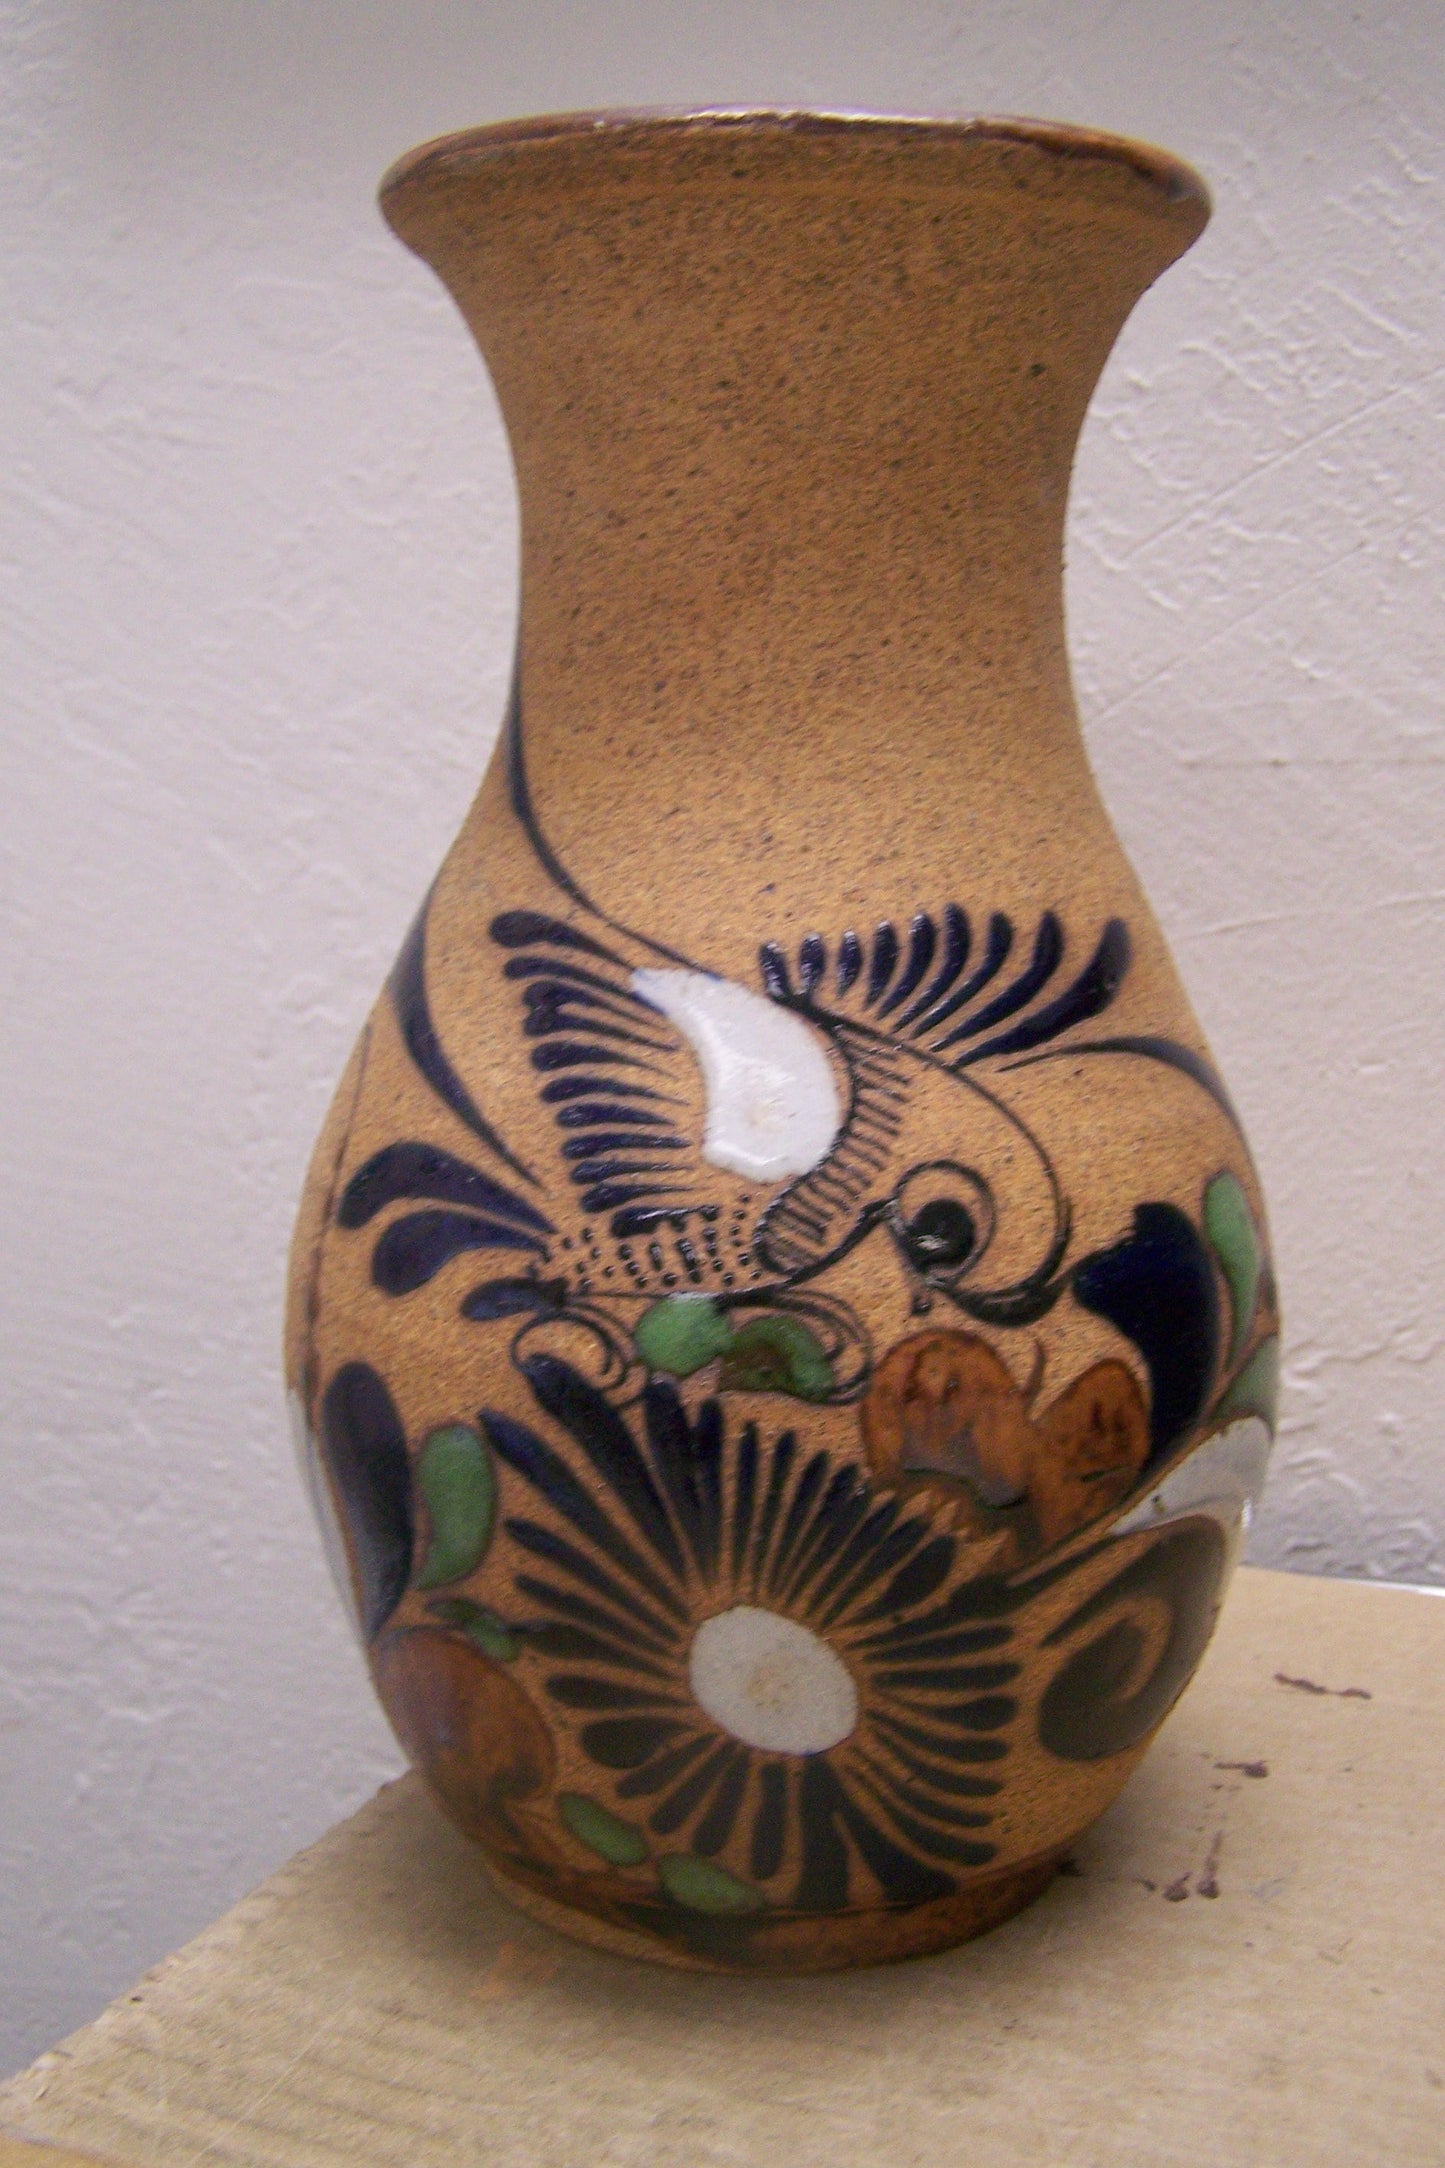 Vintage 1980s Stoneware Vase with Bird and Floral Pattern #2 - Mexico